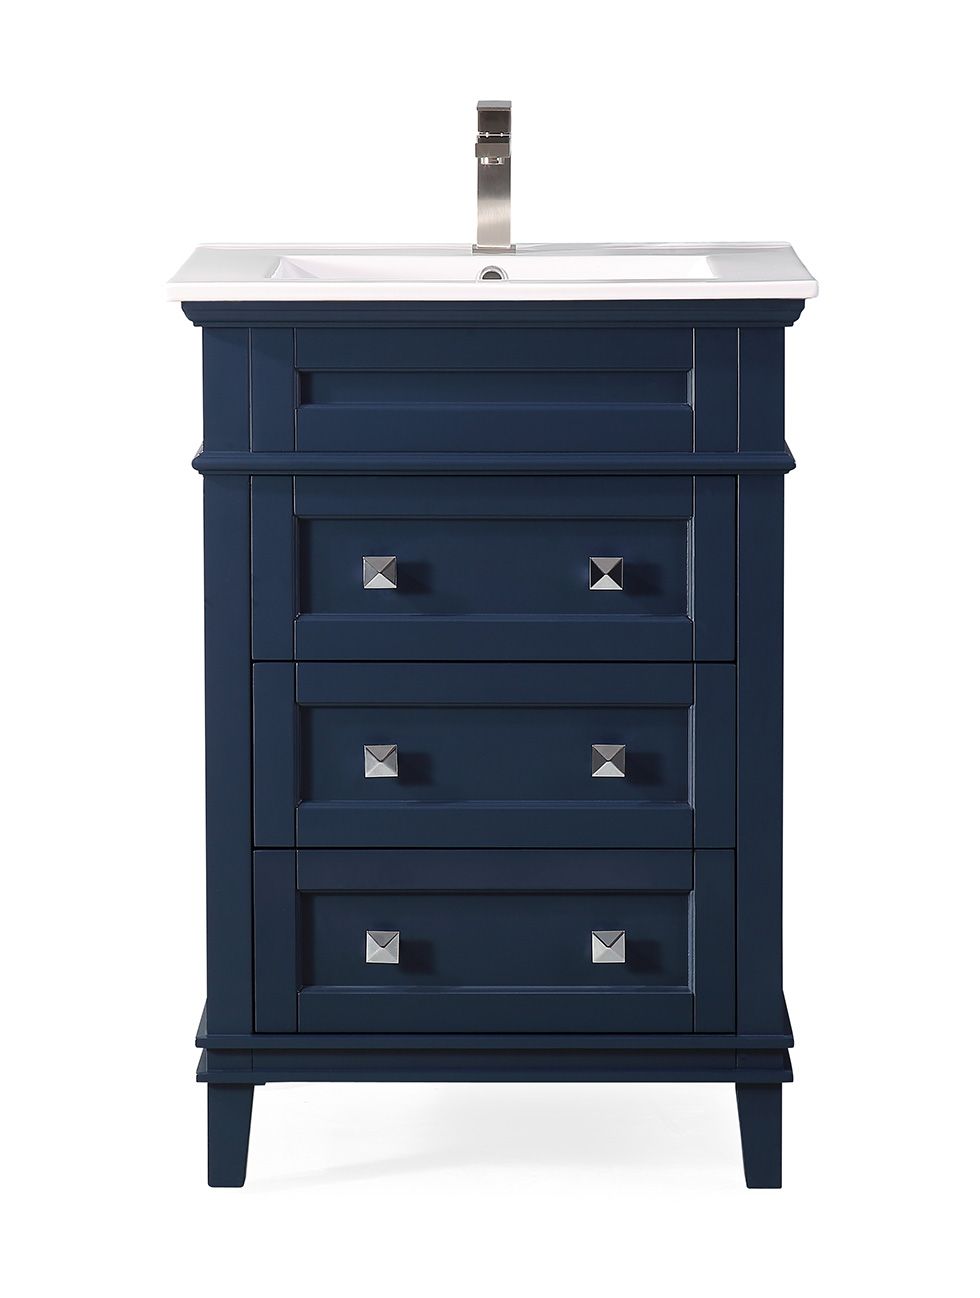 24" Contemporary Single Sink Navy Blue Bathroom Vanity with White Ceramic Sink Top, Color Options